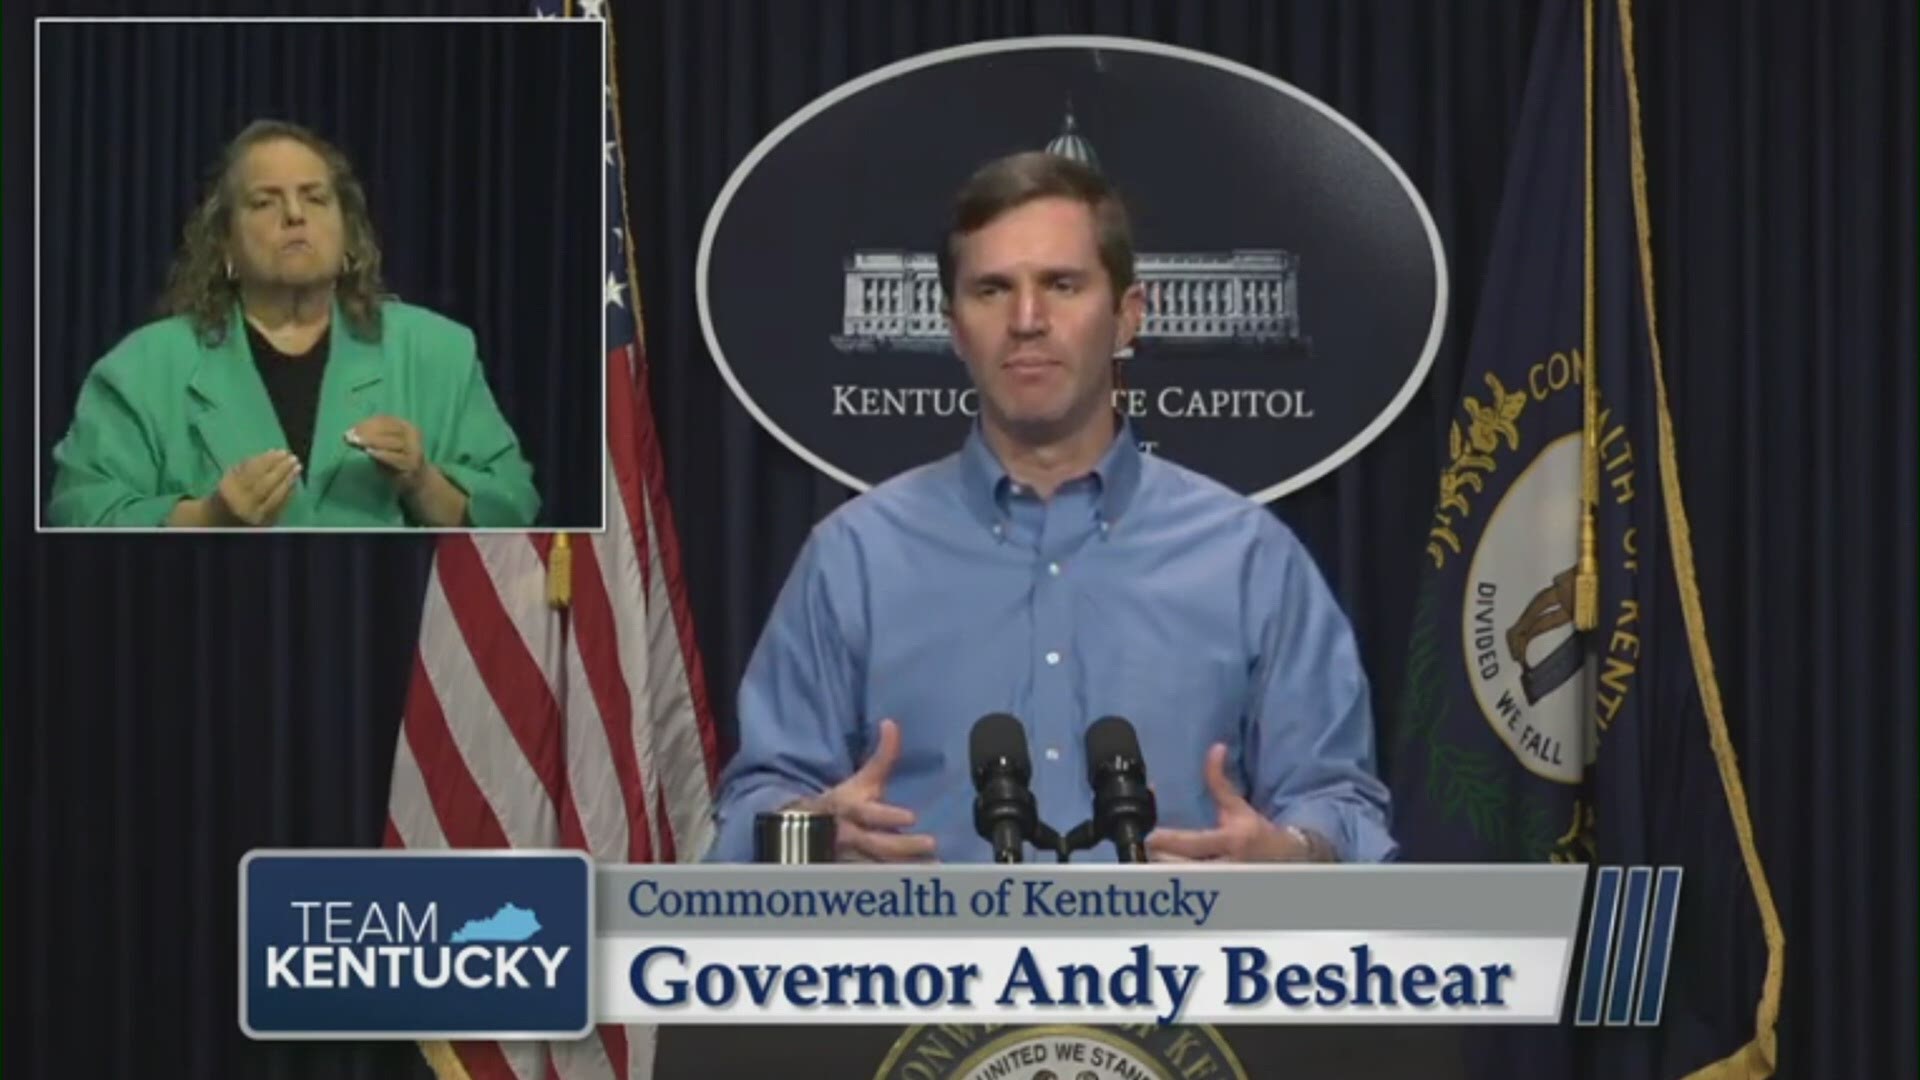 Beshear said traveling to these states that may not have the same restrictions or orders in place as Kentucky could endanger many lives amid the COVID-19 pandemic.